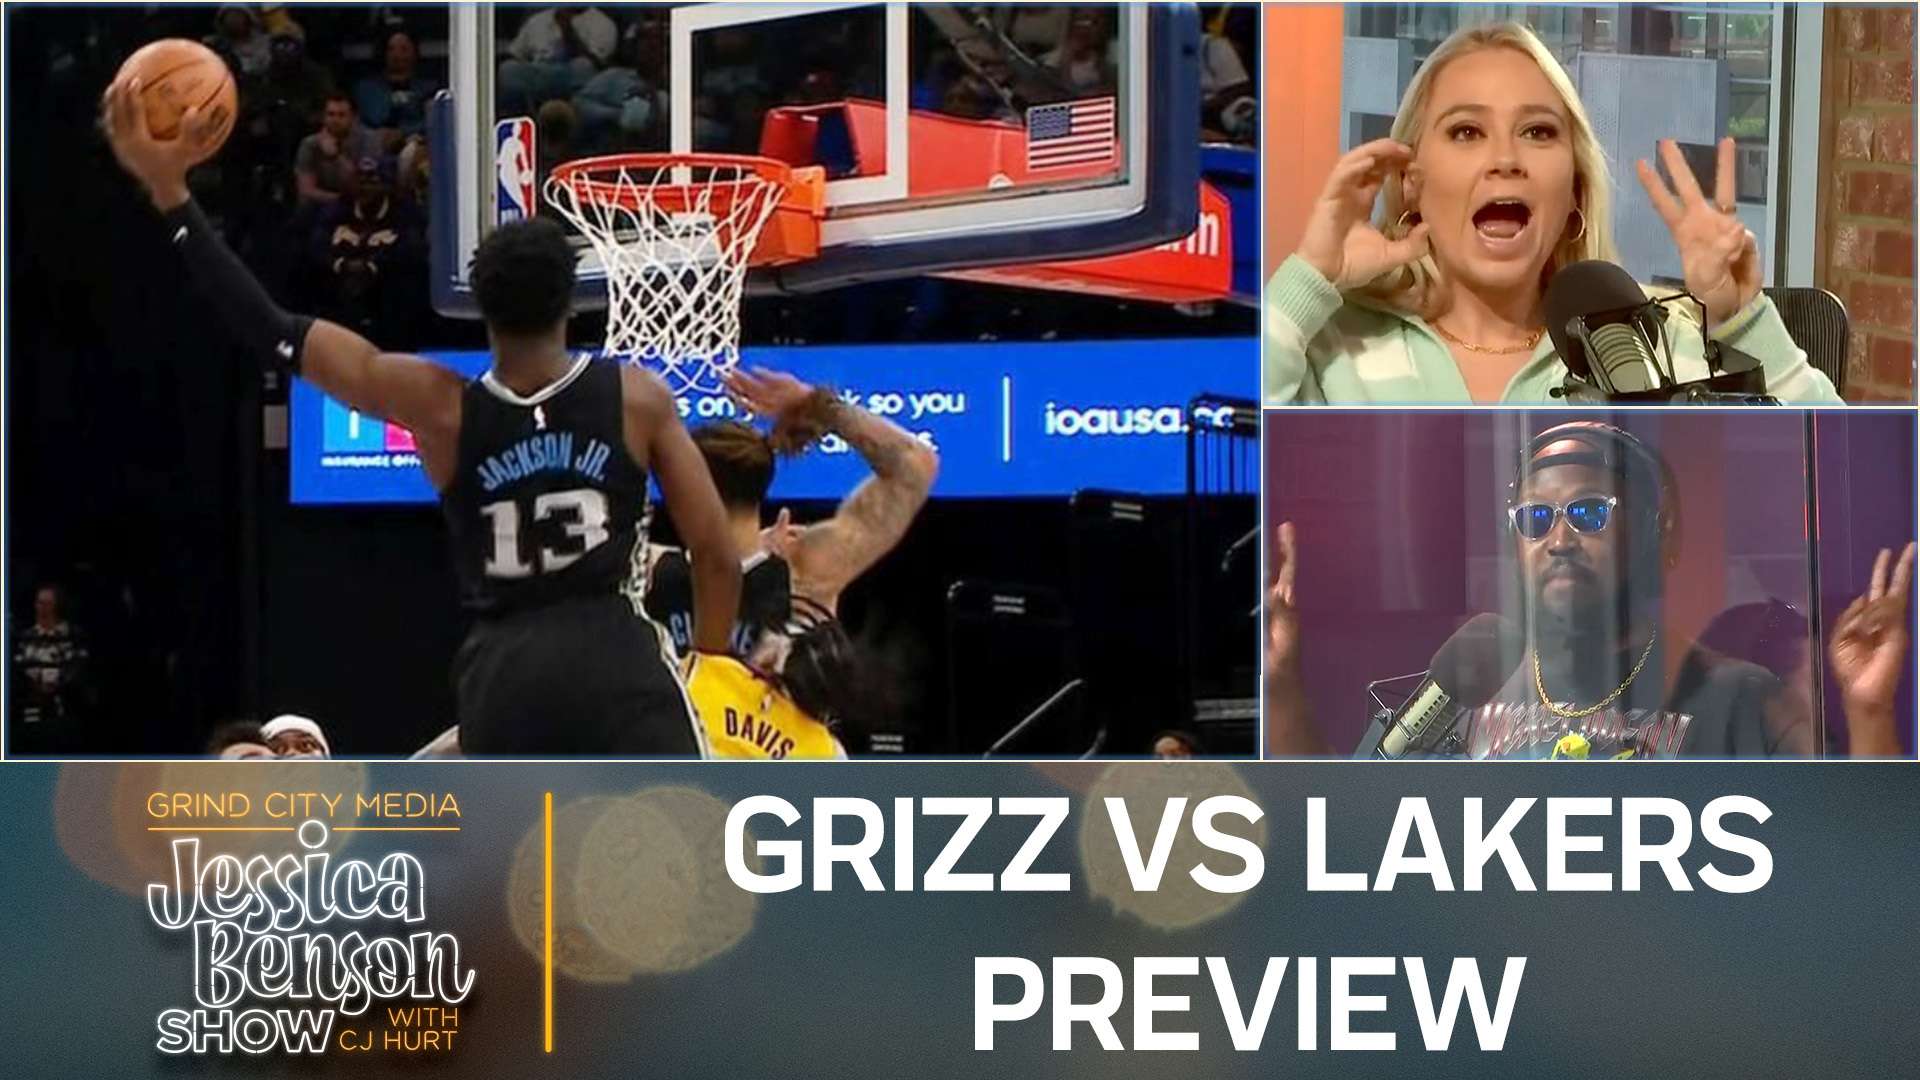 Jessica Benson Show: Grizz vs Lakers Preview, ChatGPT Sermons and Turtleneck Hate